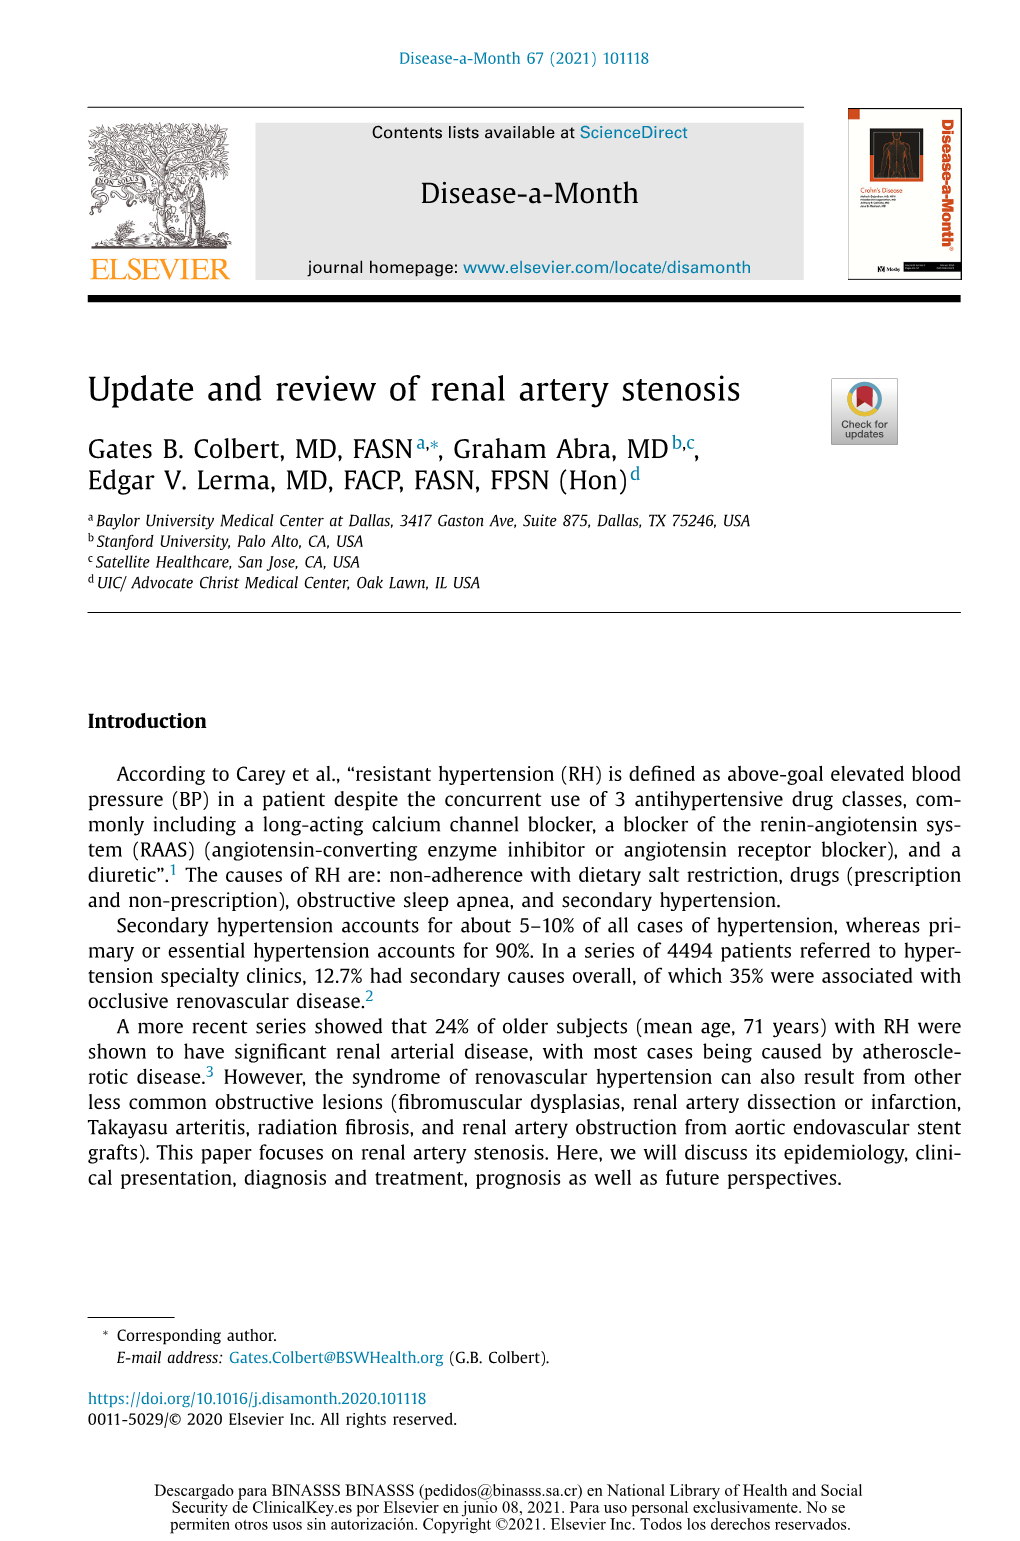 Update and Review of Renal Artery Stenosis